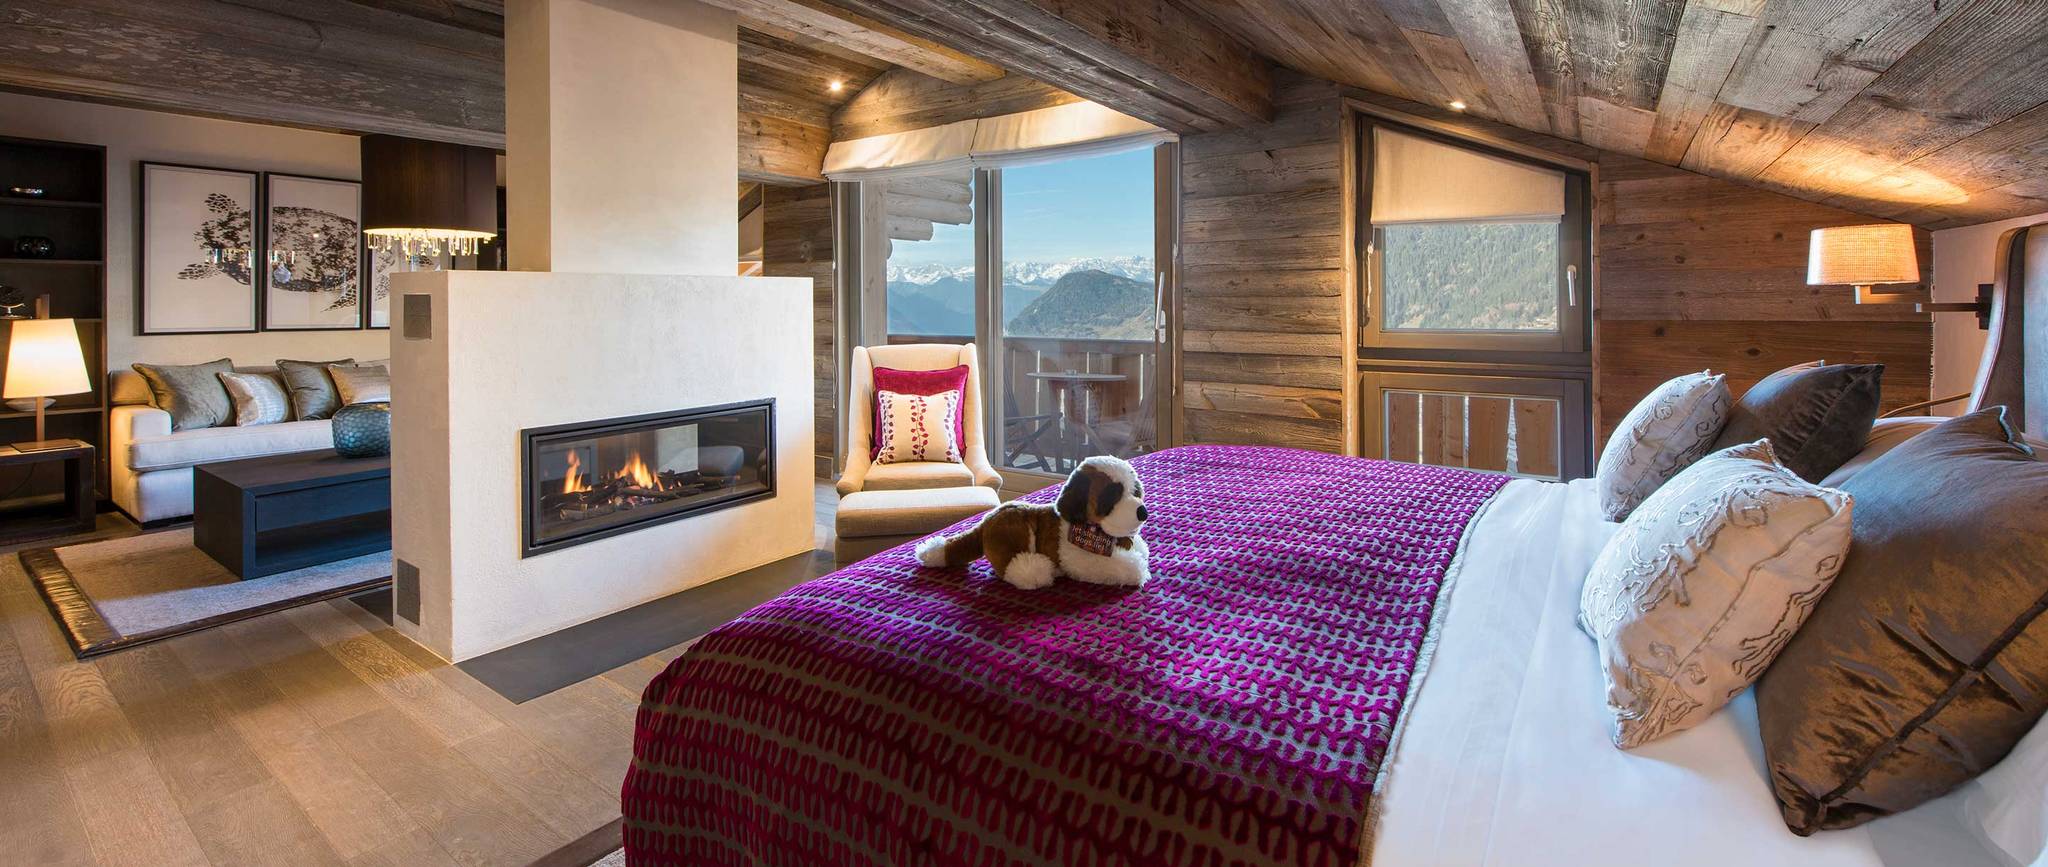 bedroom with toy puppy on bed and fireplace